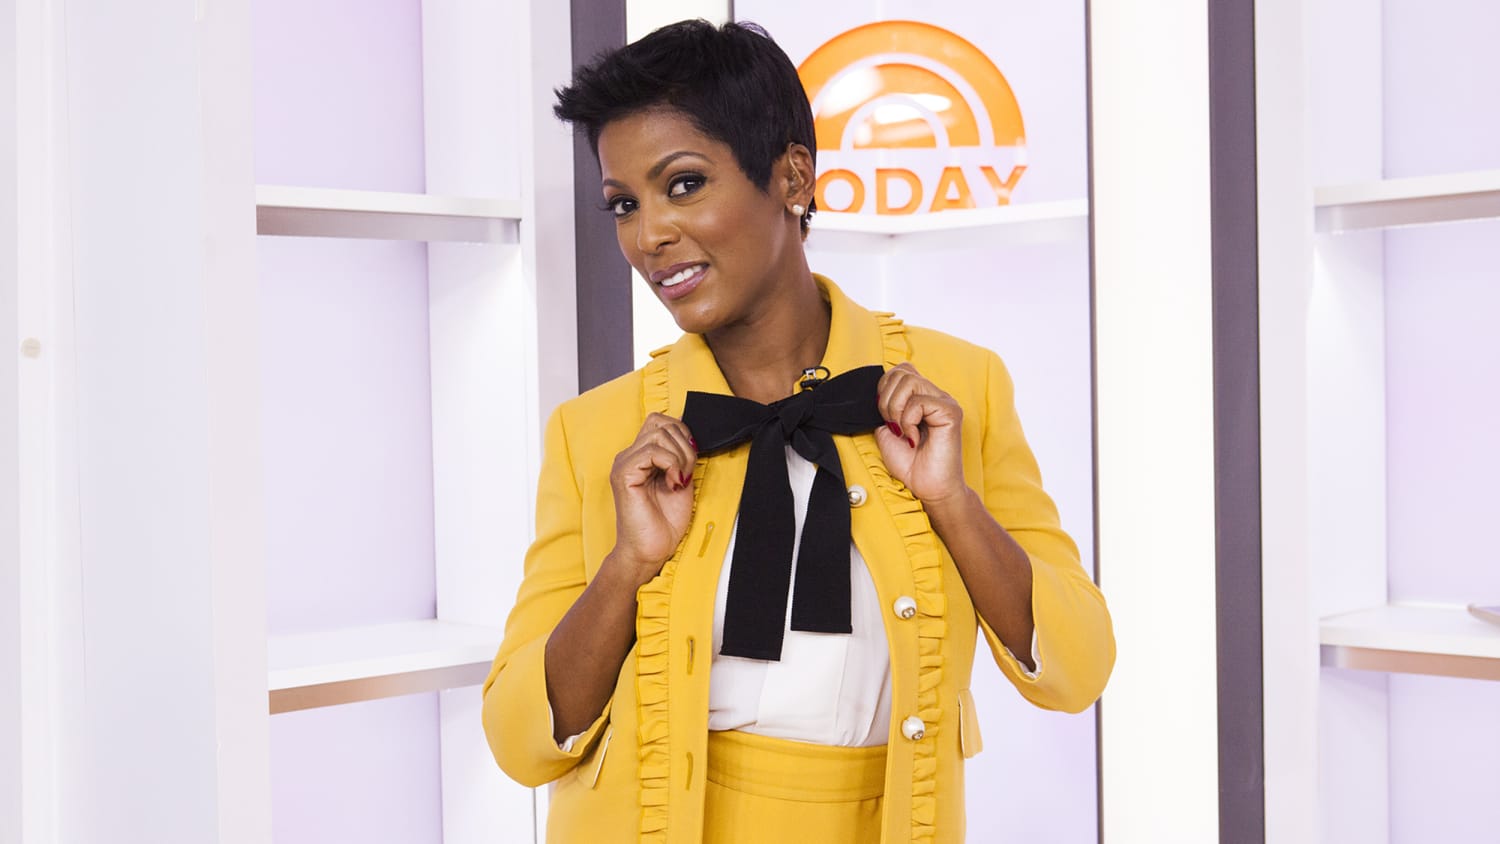 Tamron Hall - hottest news anchors in the world